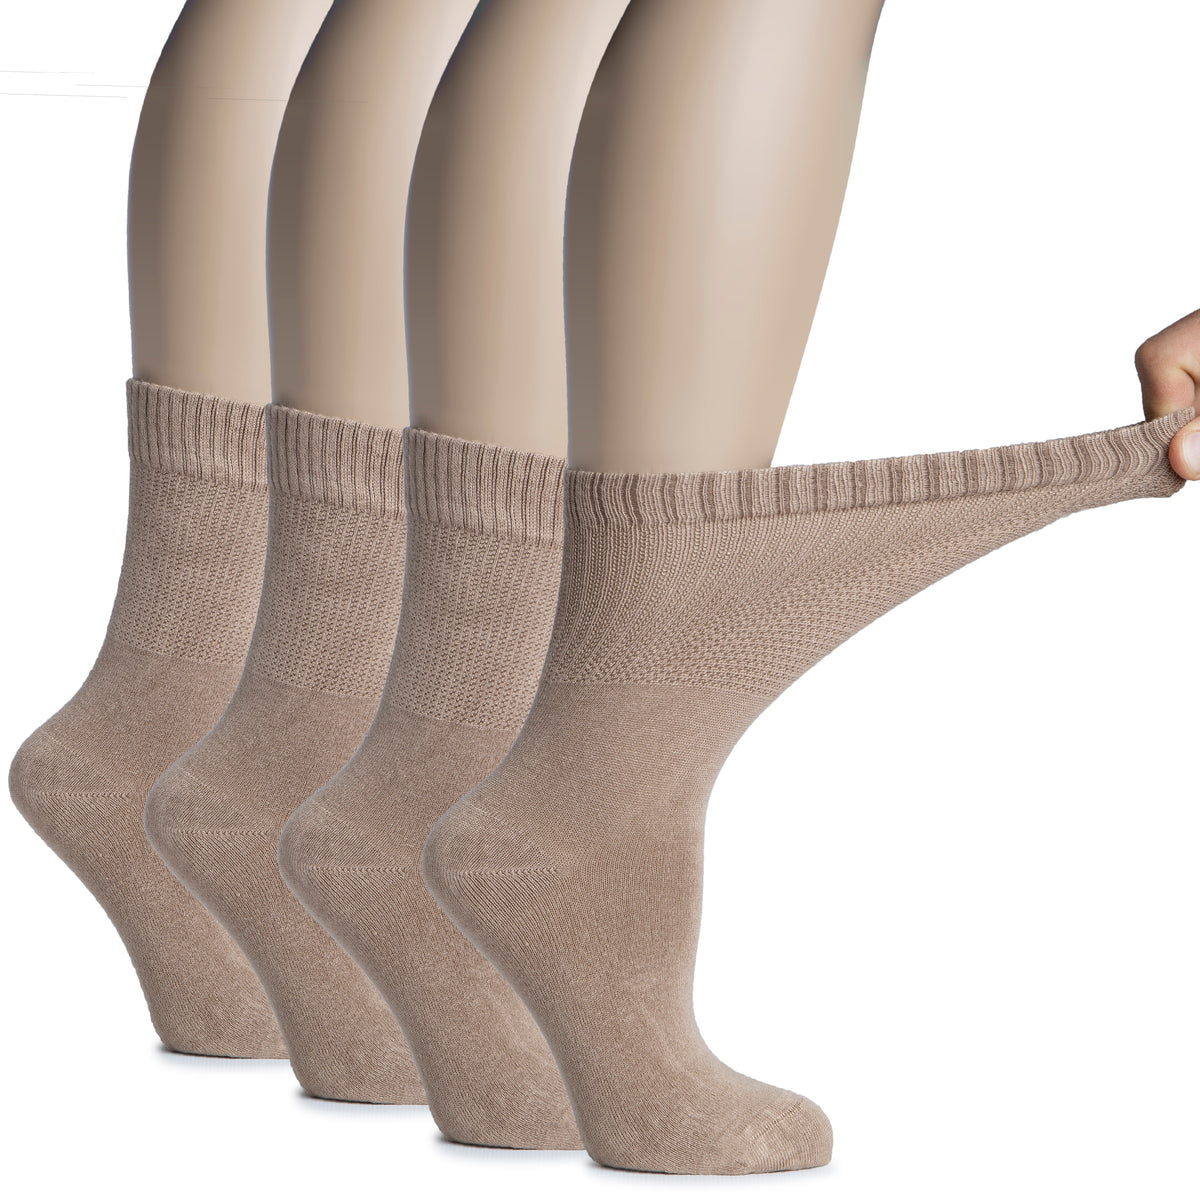 The image depicts a woman wearing Women's Bamboo Diabetic Crew Socks, with her legs wrapped in two pairs of tan socks designed to provide relief and comfort for those with diabetes.